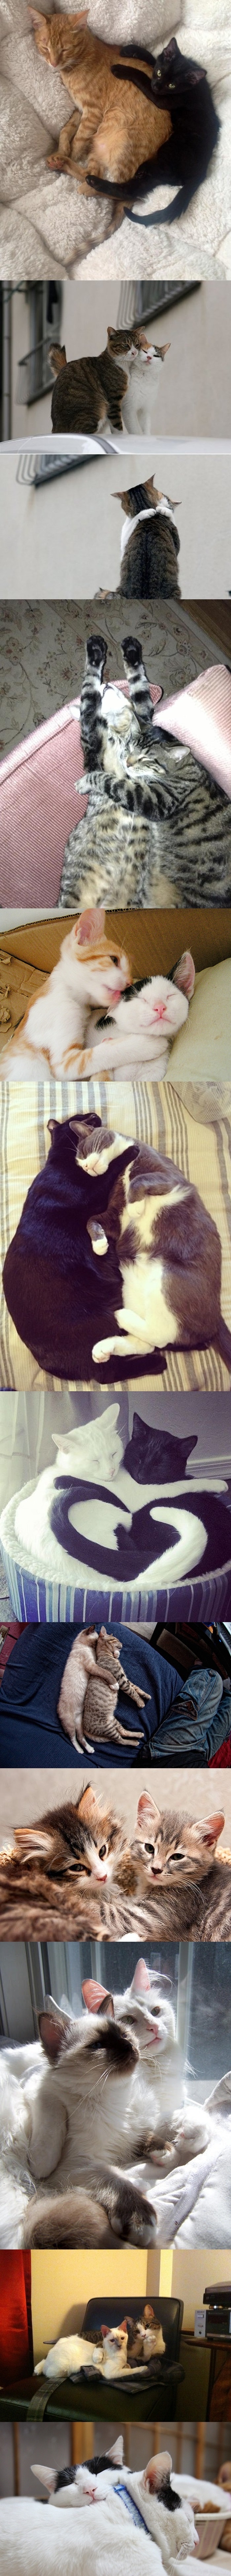 Cats that love each other